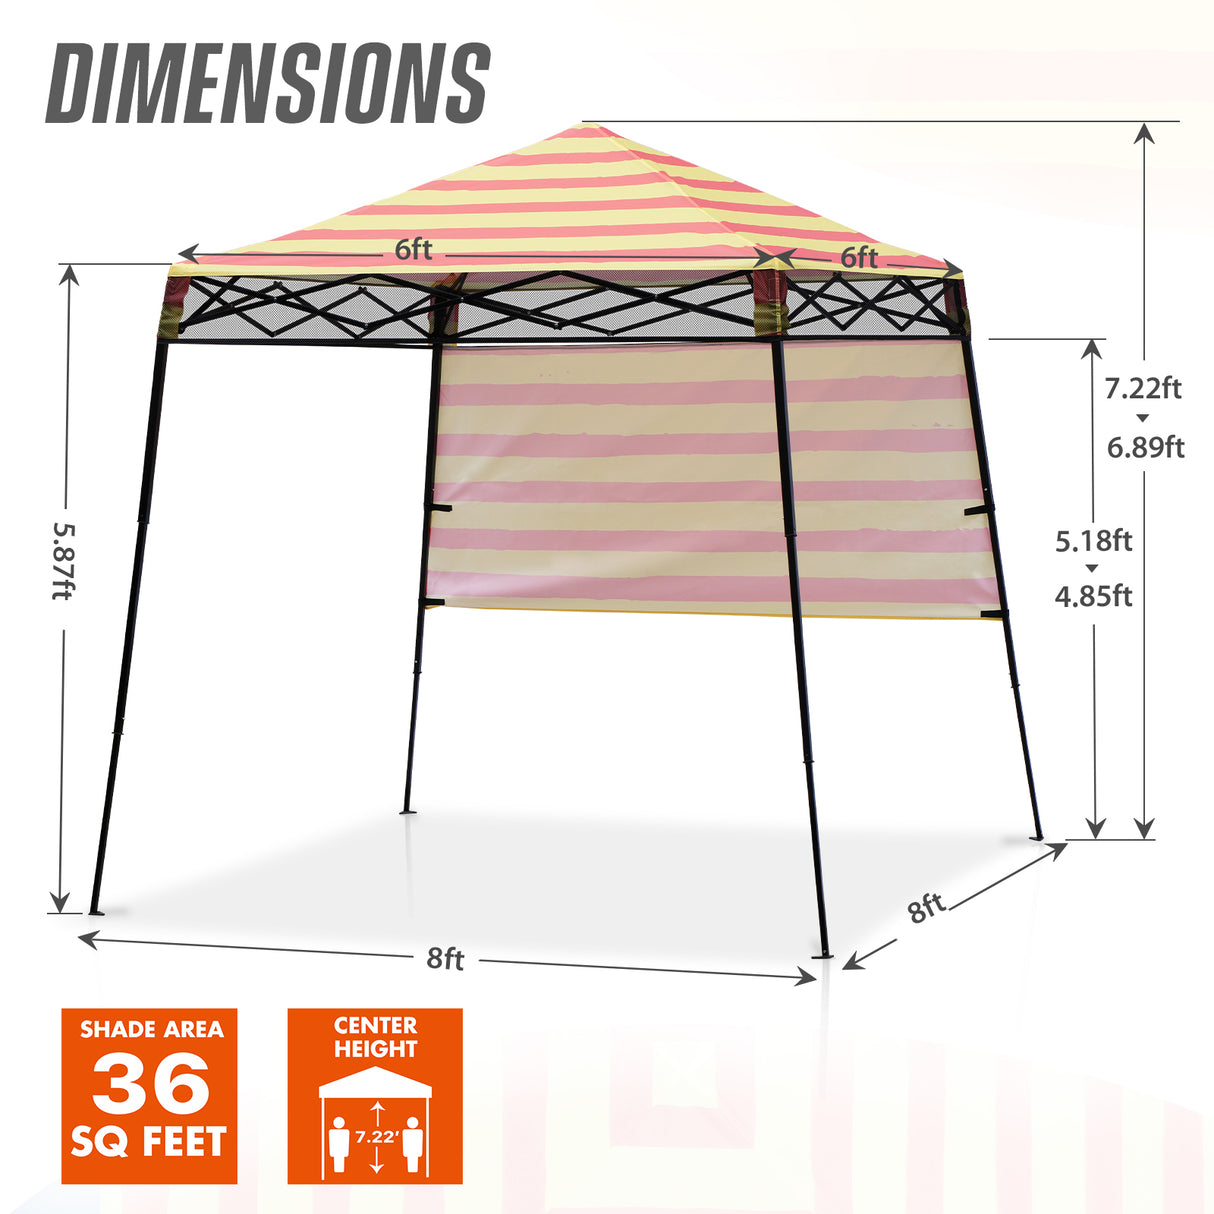 Eagle Peak SHADE GRAPHiX Day Tripper 8x8 Pop Up Canopy Tent with Digital Printed Orange Yellow Stripe Top